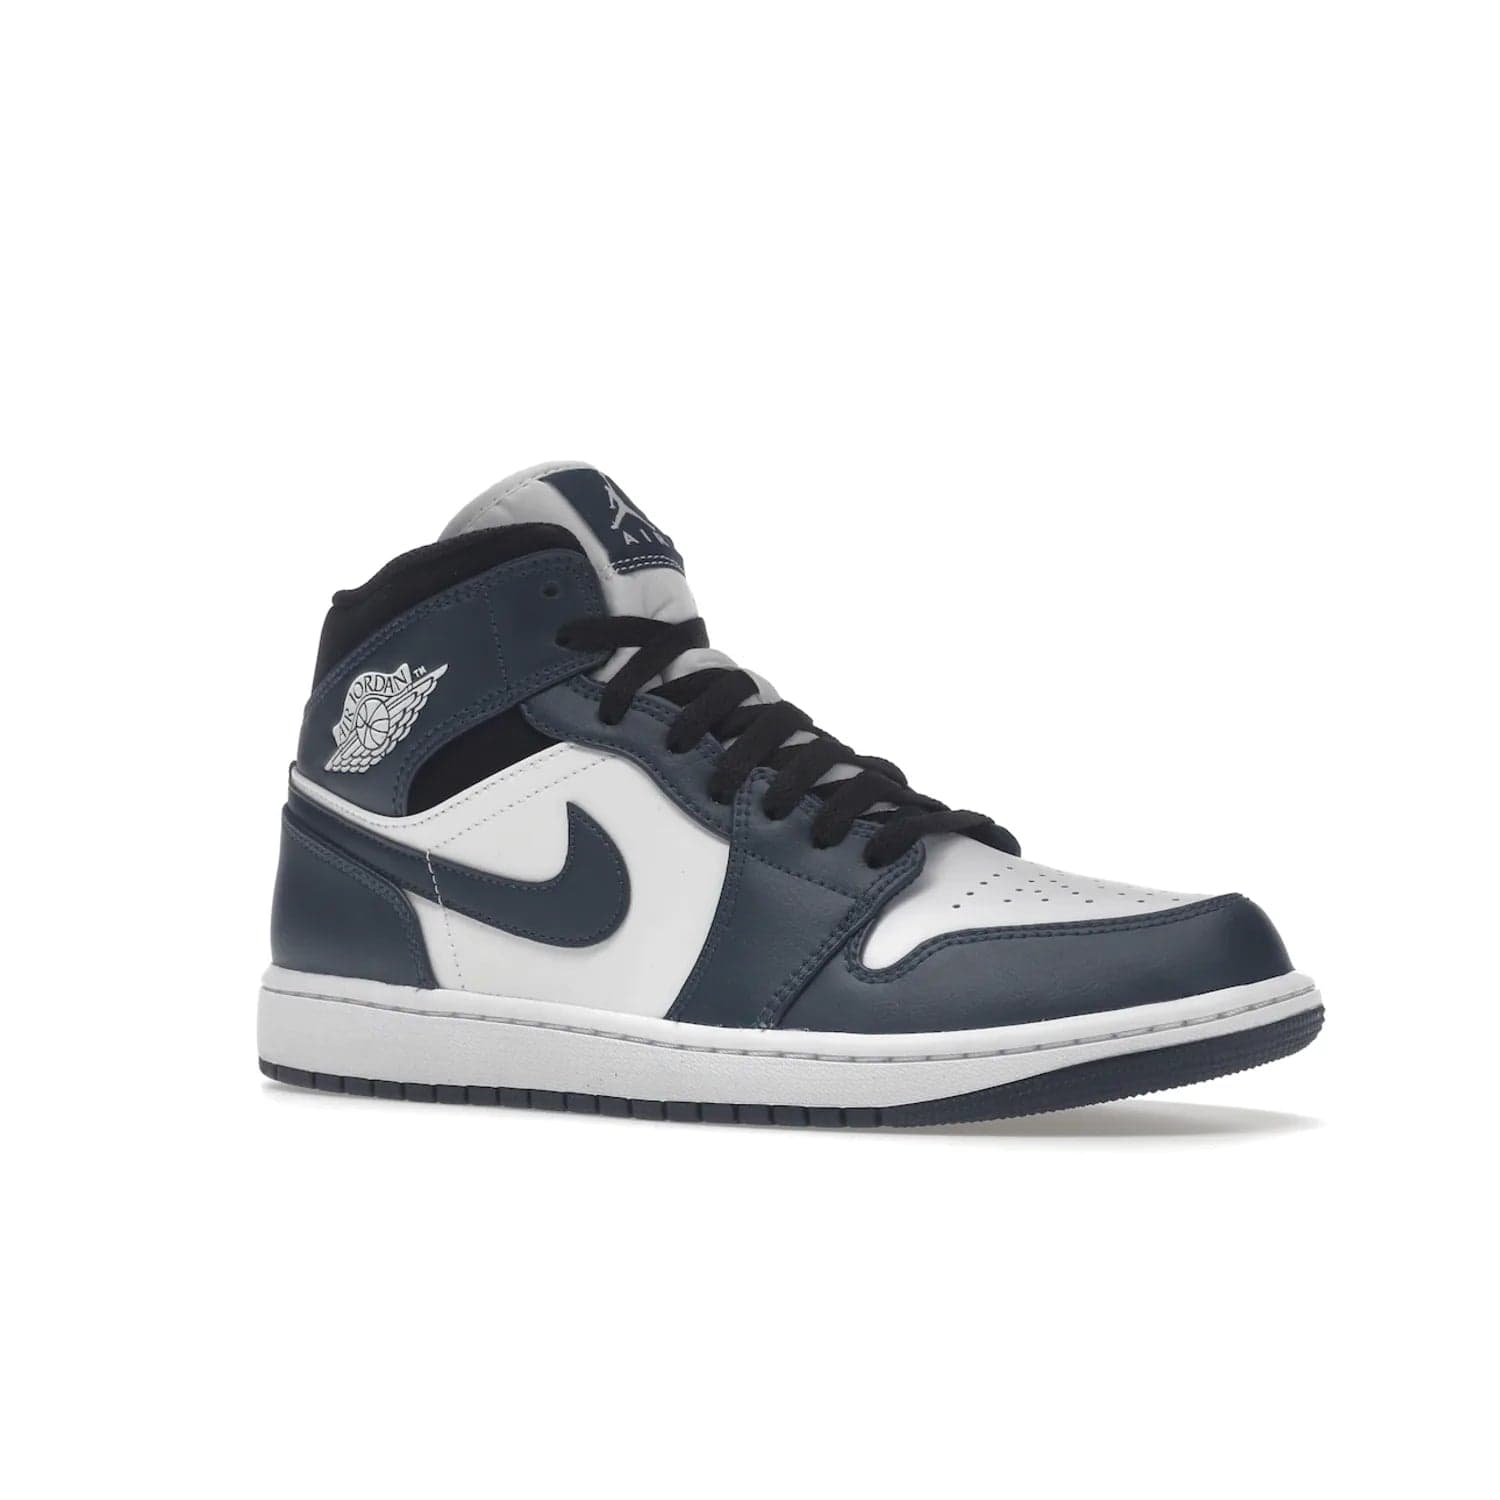 Jordan 1 Mid Armory Navy - Image 4 - Only at www.BallersClubKickz.com - The Jordan 1 Mid Armory Navy: classic basketball sneaker with soft white leather upper, deep navy blue overlays, and black leather ankle detailing. Iconic style with Jordan Wings logo and Jumpman label.